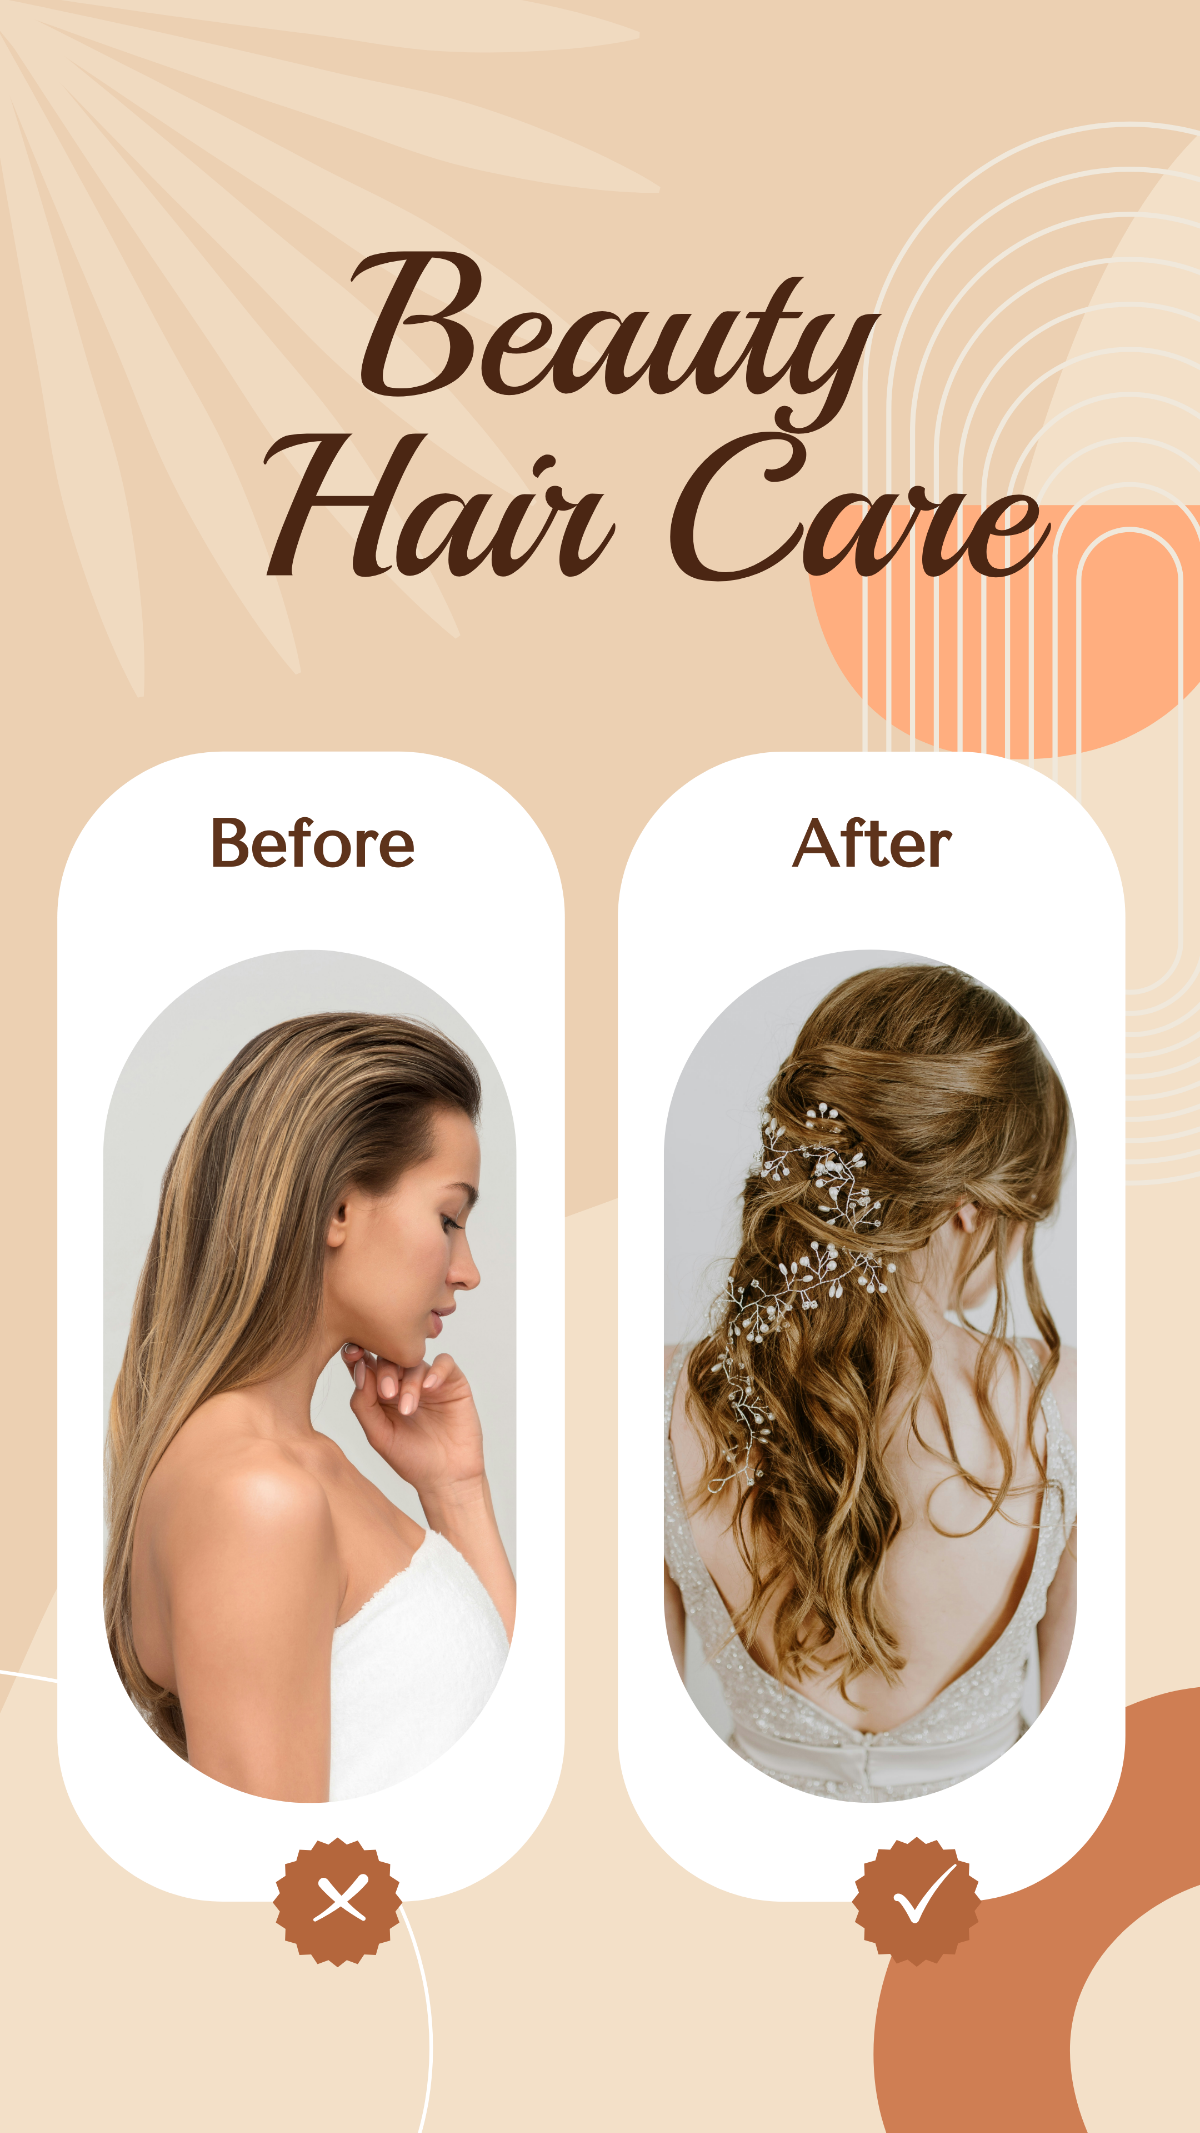 Beauty Hair Care Before and After Instagram Post